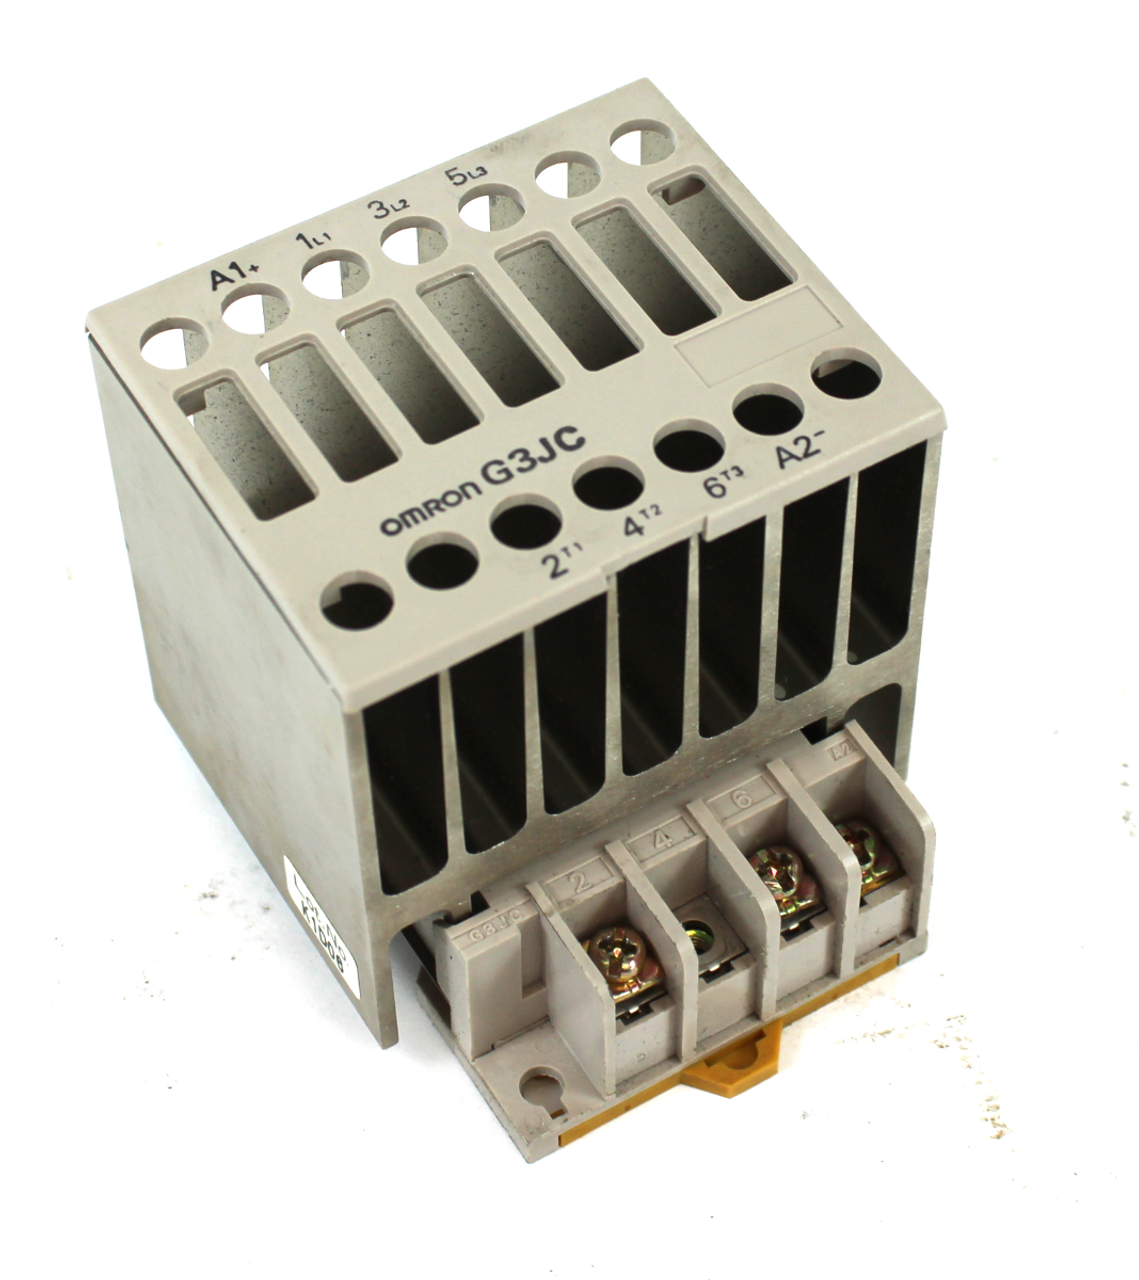 Omron G3JC-208BL Solid State Relay